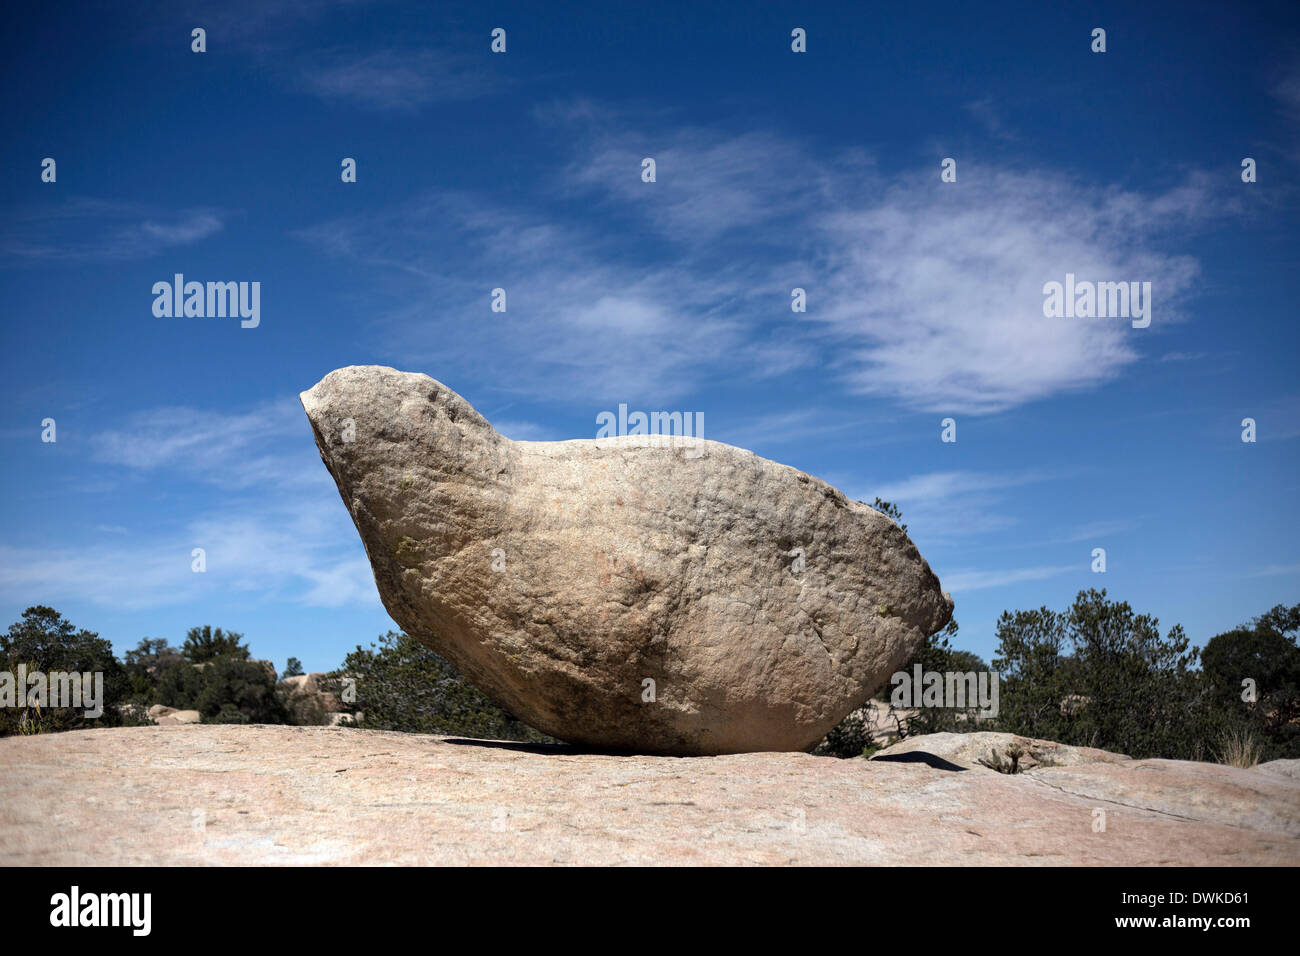 (140311) -- BAJA CALIFORNIA, March 11, 2014 (Xinhua) -- Image taken on March 9, 2014 shows rock formations at the archaelogical site of 'El Vallecito' near La Rumorosa town Baja California, northwest of Mexico. According to the National Institute of Antropology and History (INAH, its acronym in Spanish), El Vallecito was occupied by members of the Yuman linguistic family, which originally lived in the northwest area of the state of Baja California and southern California. At the site there are rock paintings of simple lines traced with mineral dyes in white, red, black and yellow. (Xinhua/Guil Stock Photo